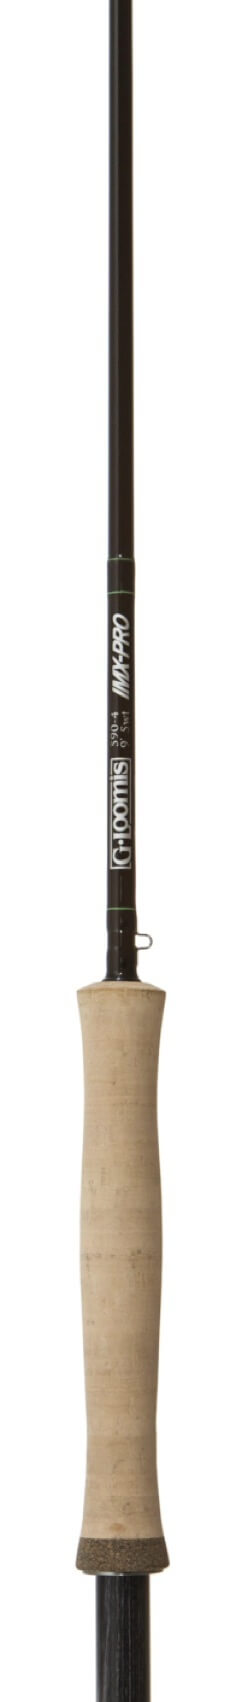 Conventional Rods  G.Loomis Canada – G. Loomis Canada